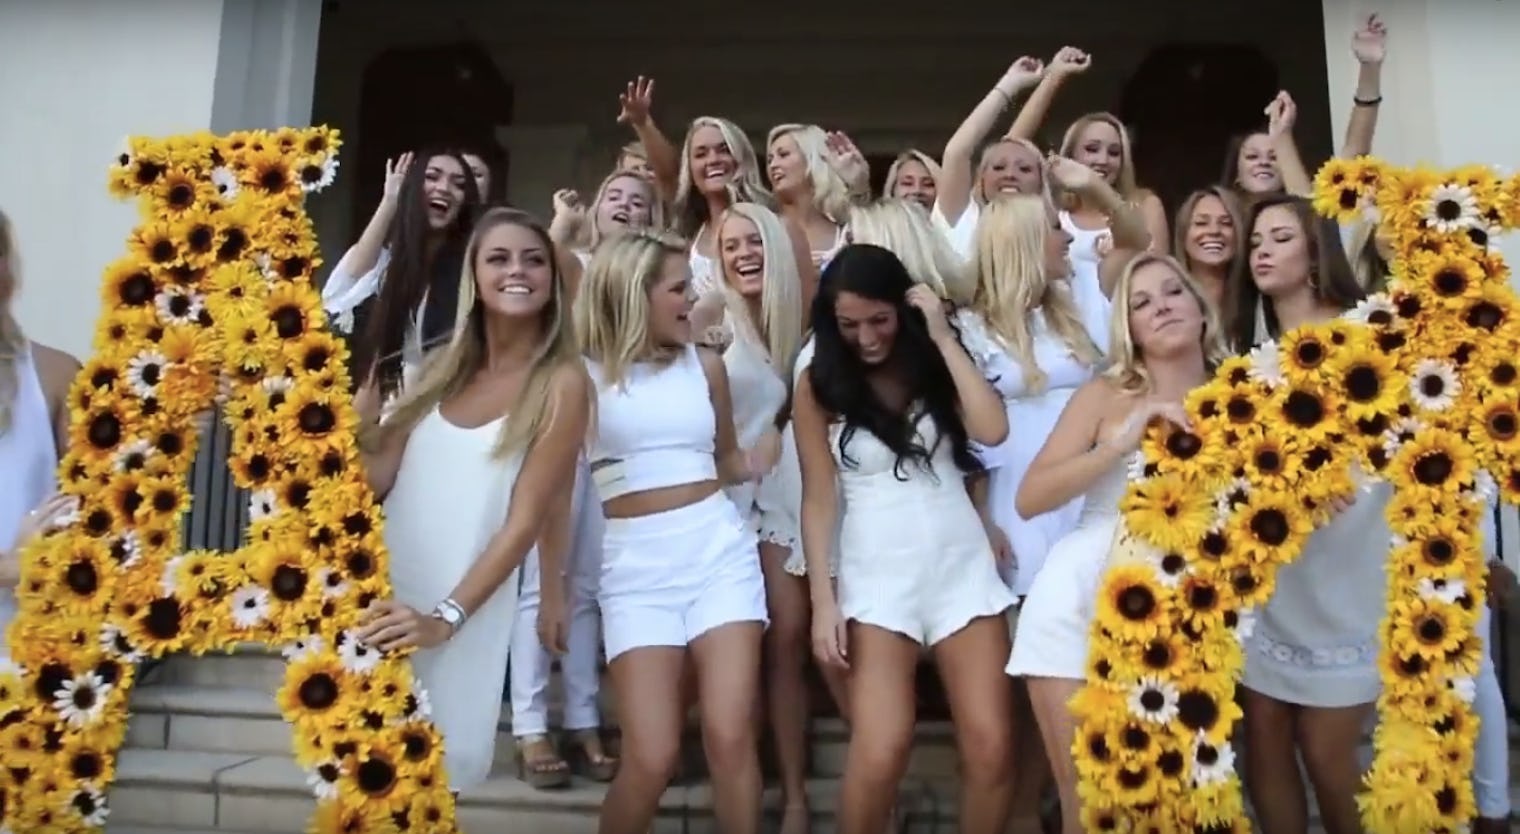 That Objectifying Alpha Phi Sorority Video Is Exactly What The University Of Alabama Is Trying